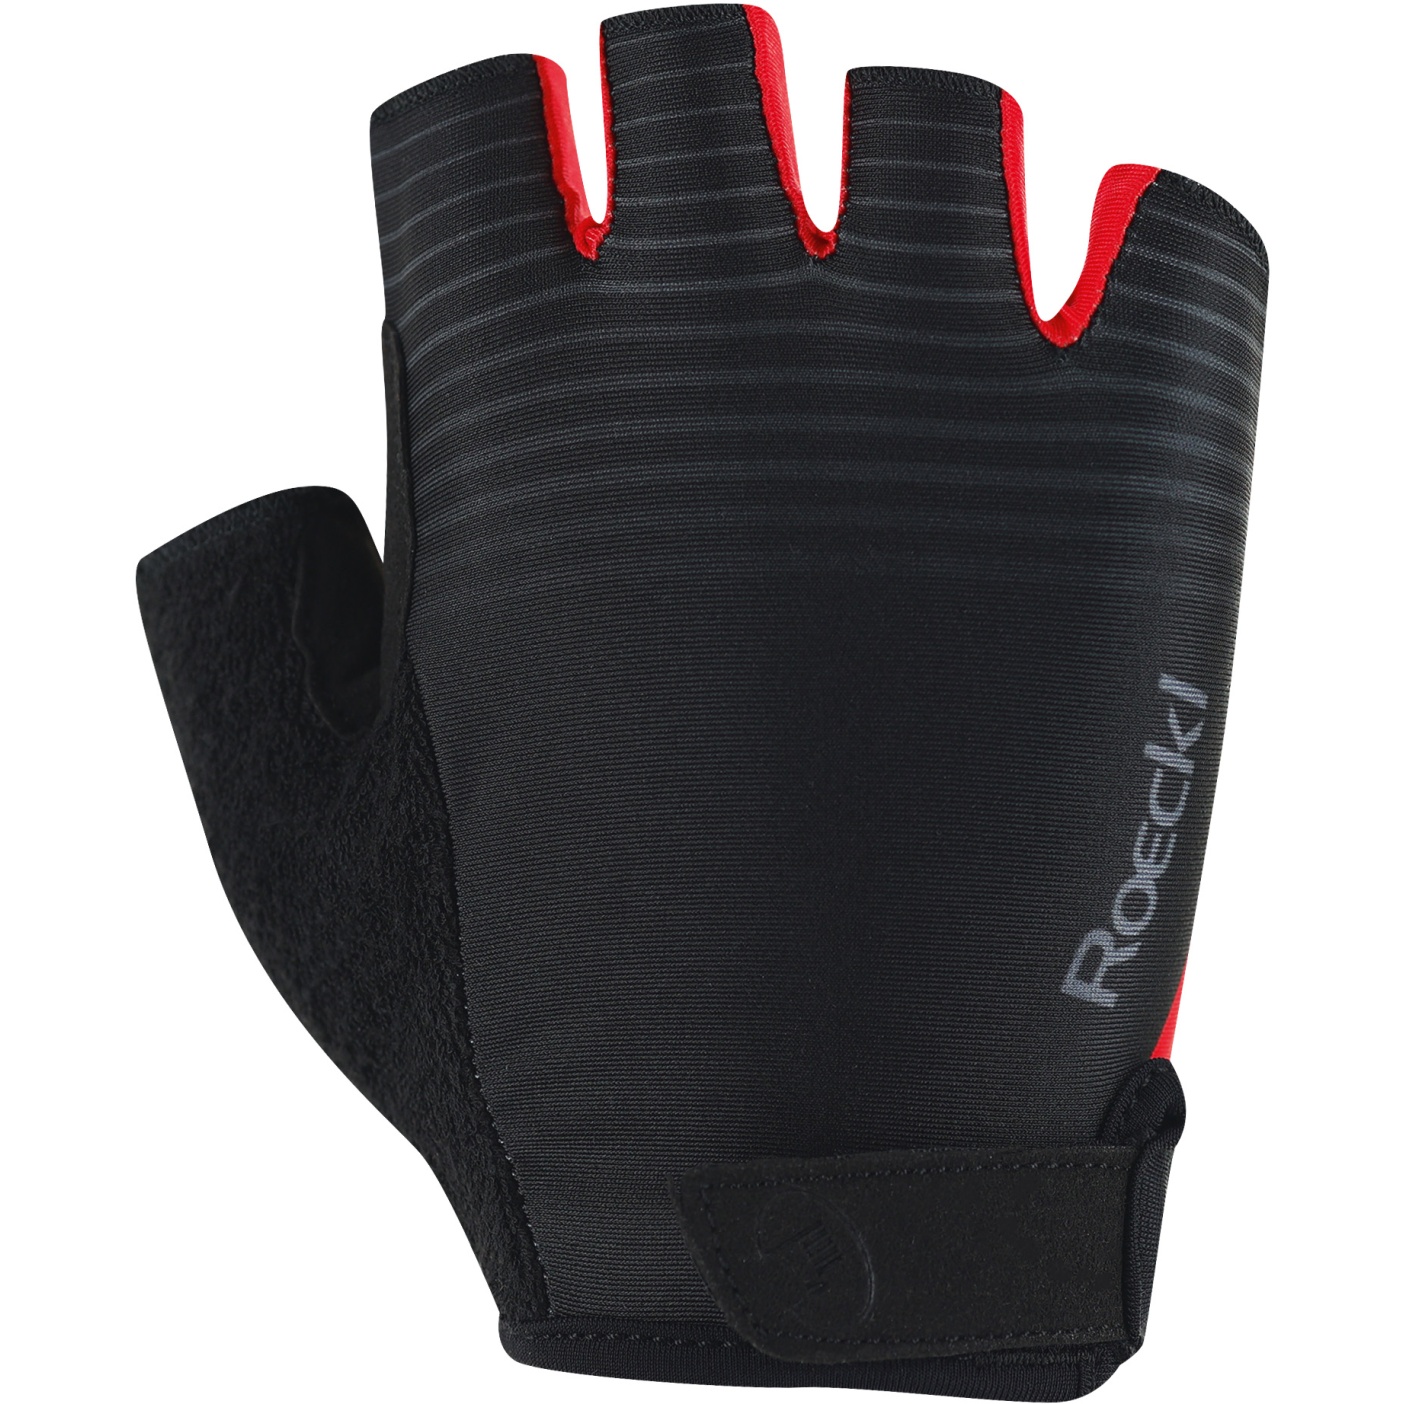 Image of Roeckl Sports Bernex Cycling Gloves - black shadow/signal 9603